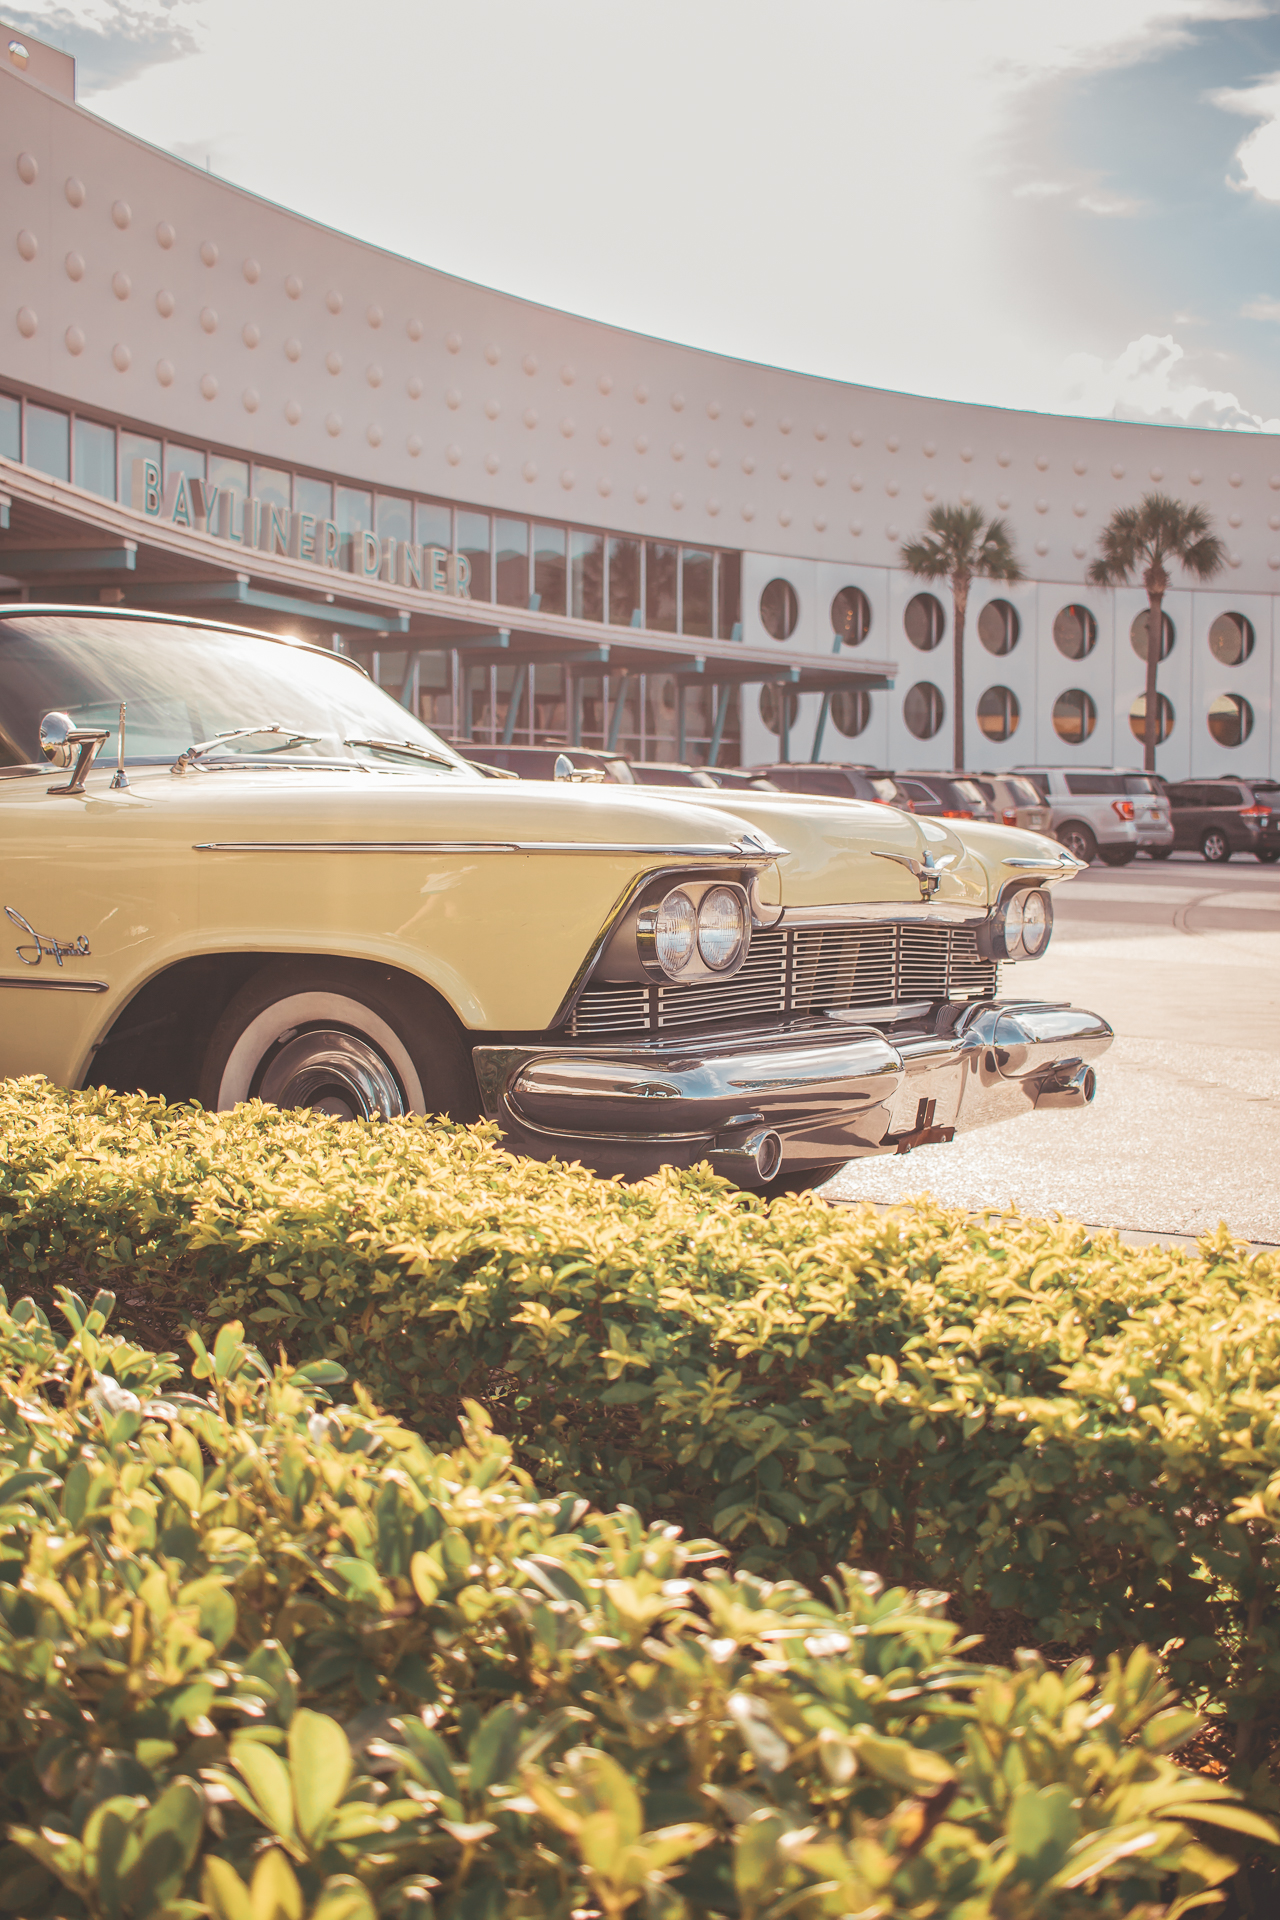  Being on property at Cabana Bay takes you back to such an aesthetically pleasing era - especially for cars! 